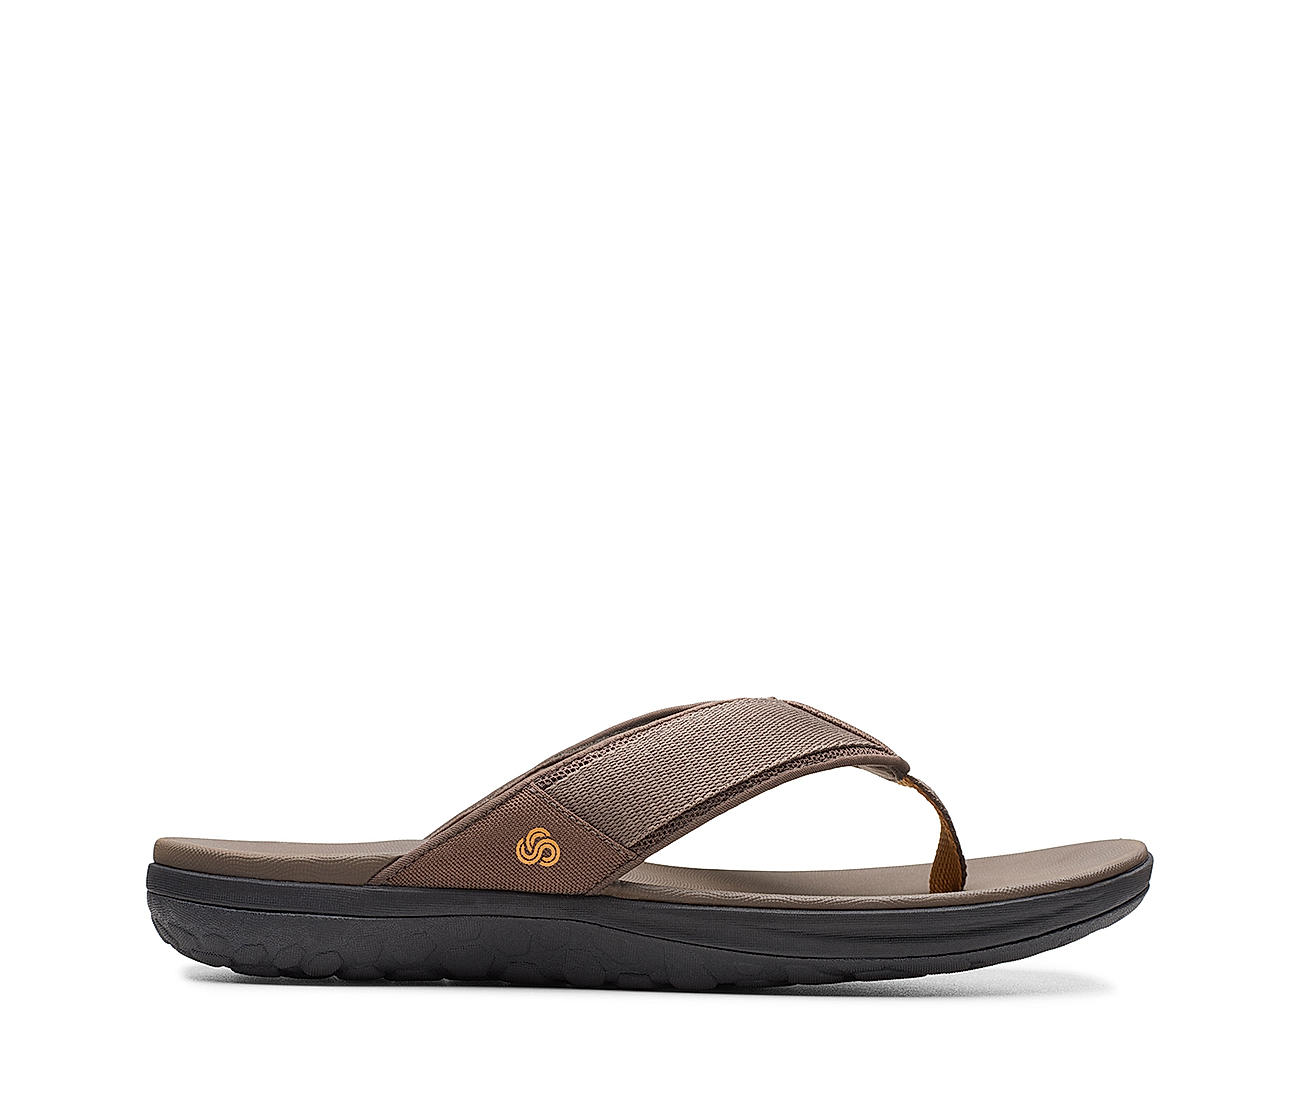 Buy Clarks Step Beat Brown Casual Chappal Shoes for Men Regal Shoes |7823409